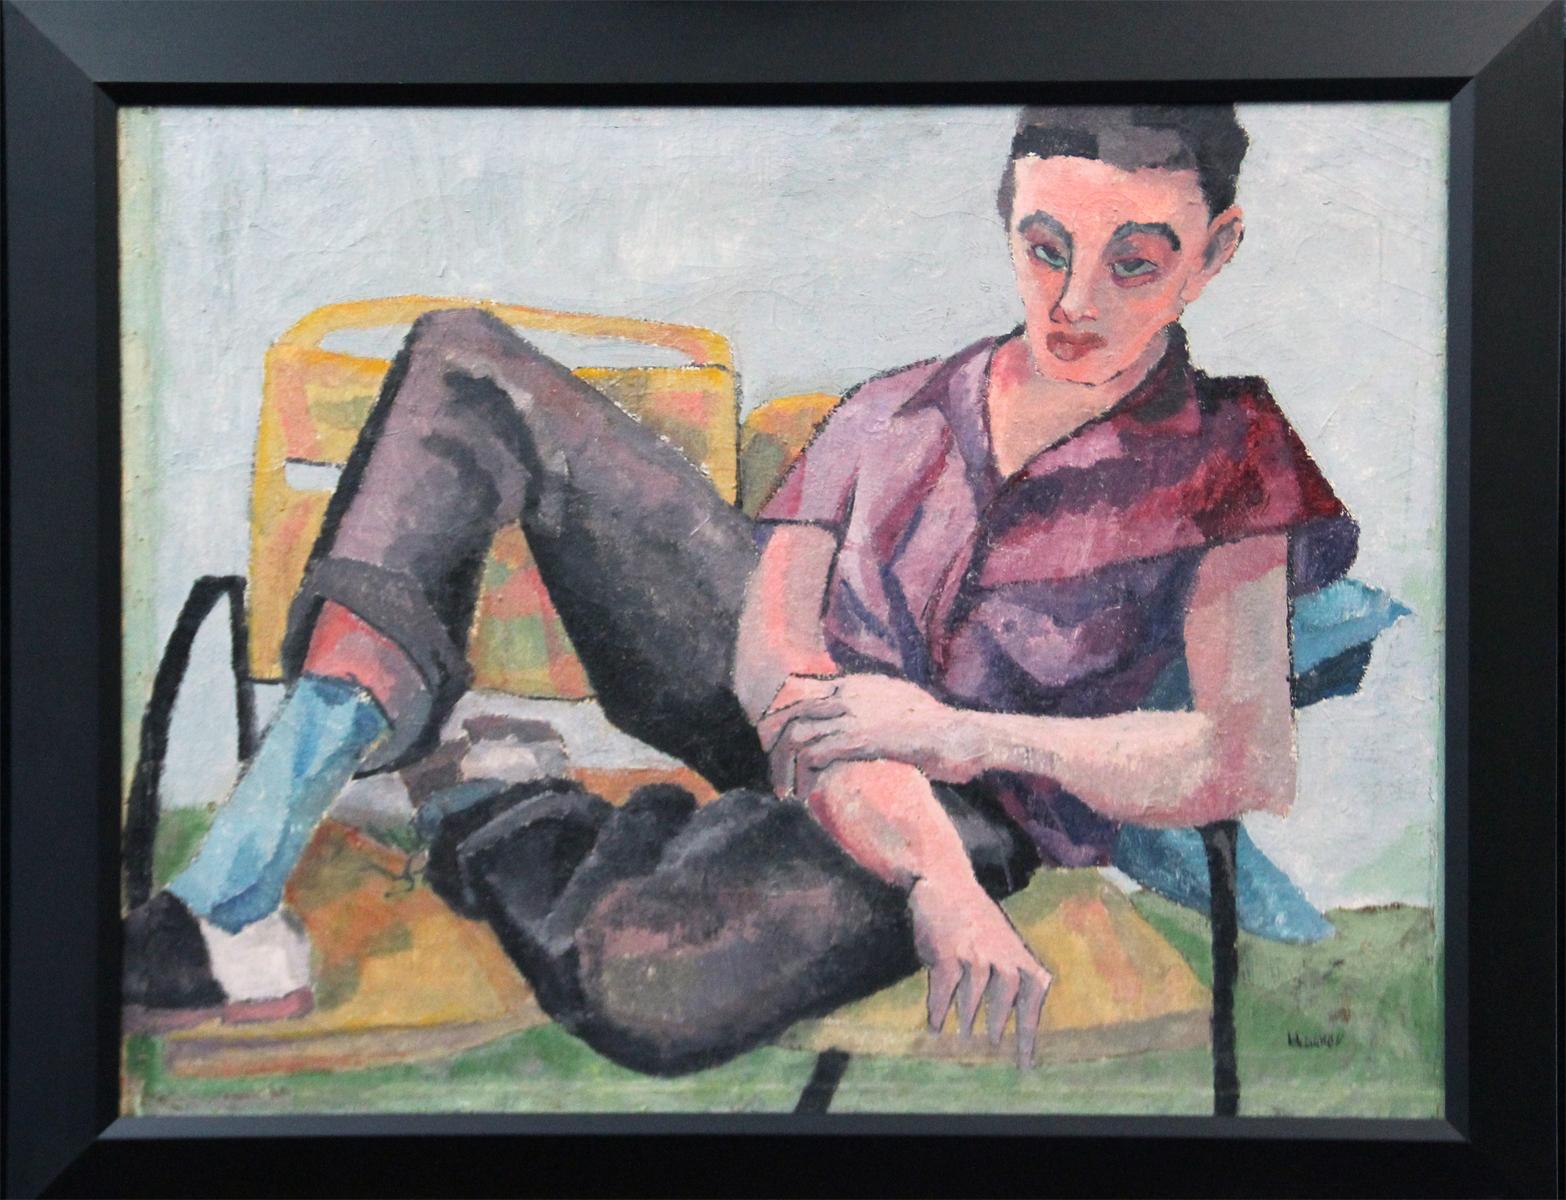 Bernard Harmon, Young Man, Oil on Canvas, 1955, Signed Lower Right im Angebot 1